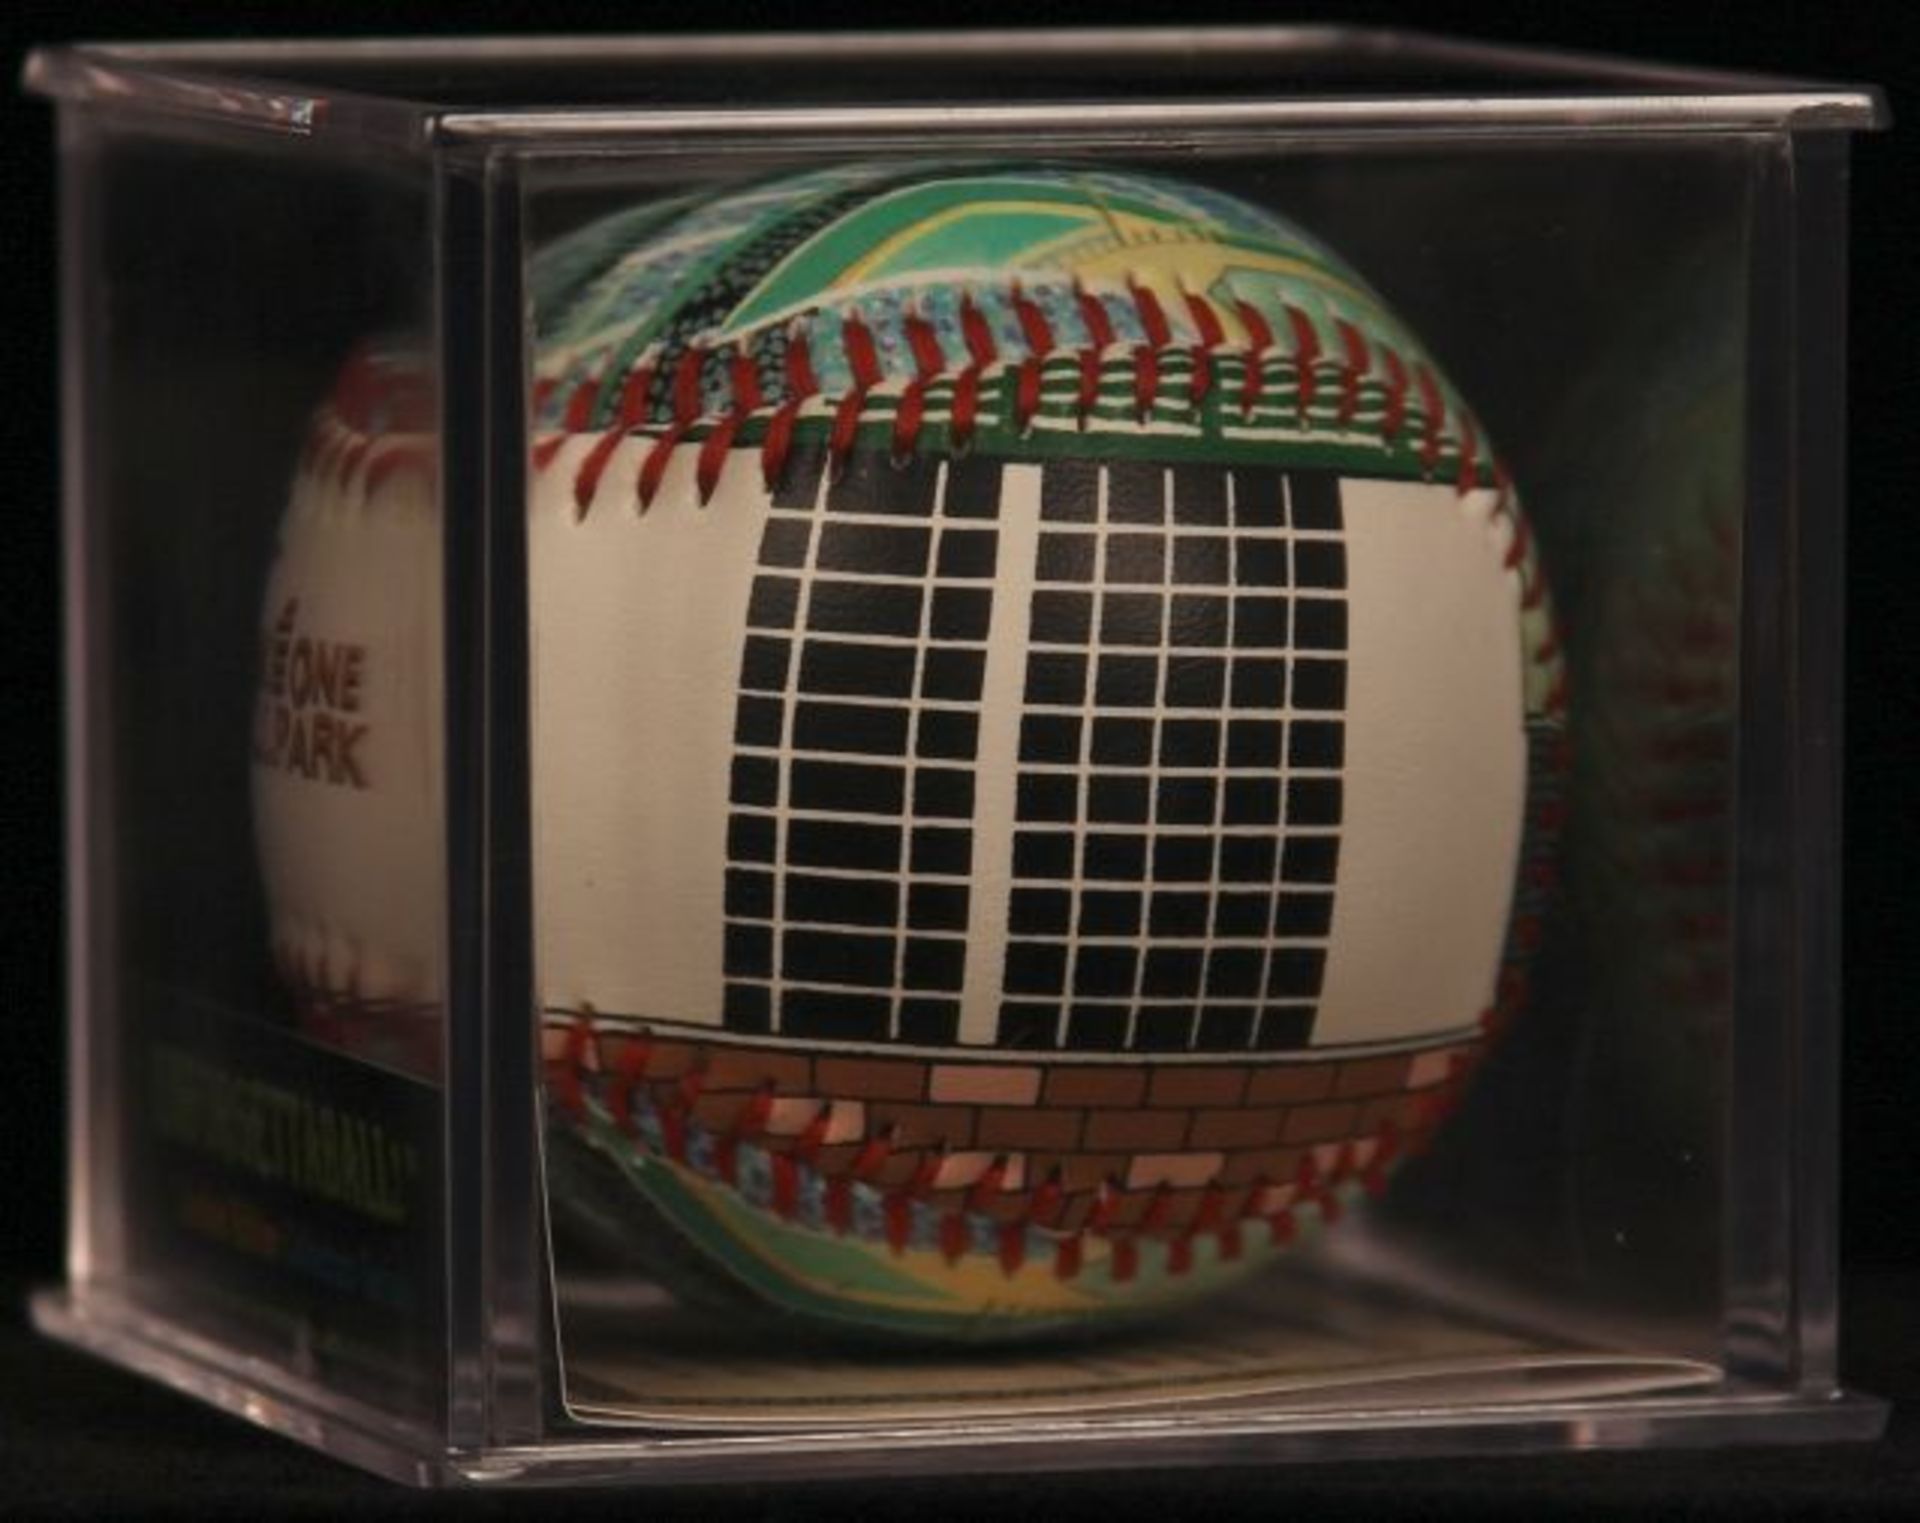 Unforgettaball! "Bank One Ballpark" Collectable Baseball - Image 3 of 6